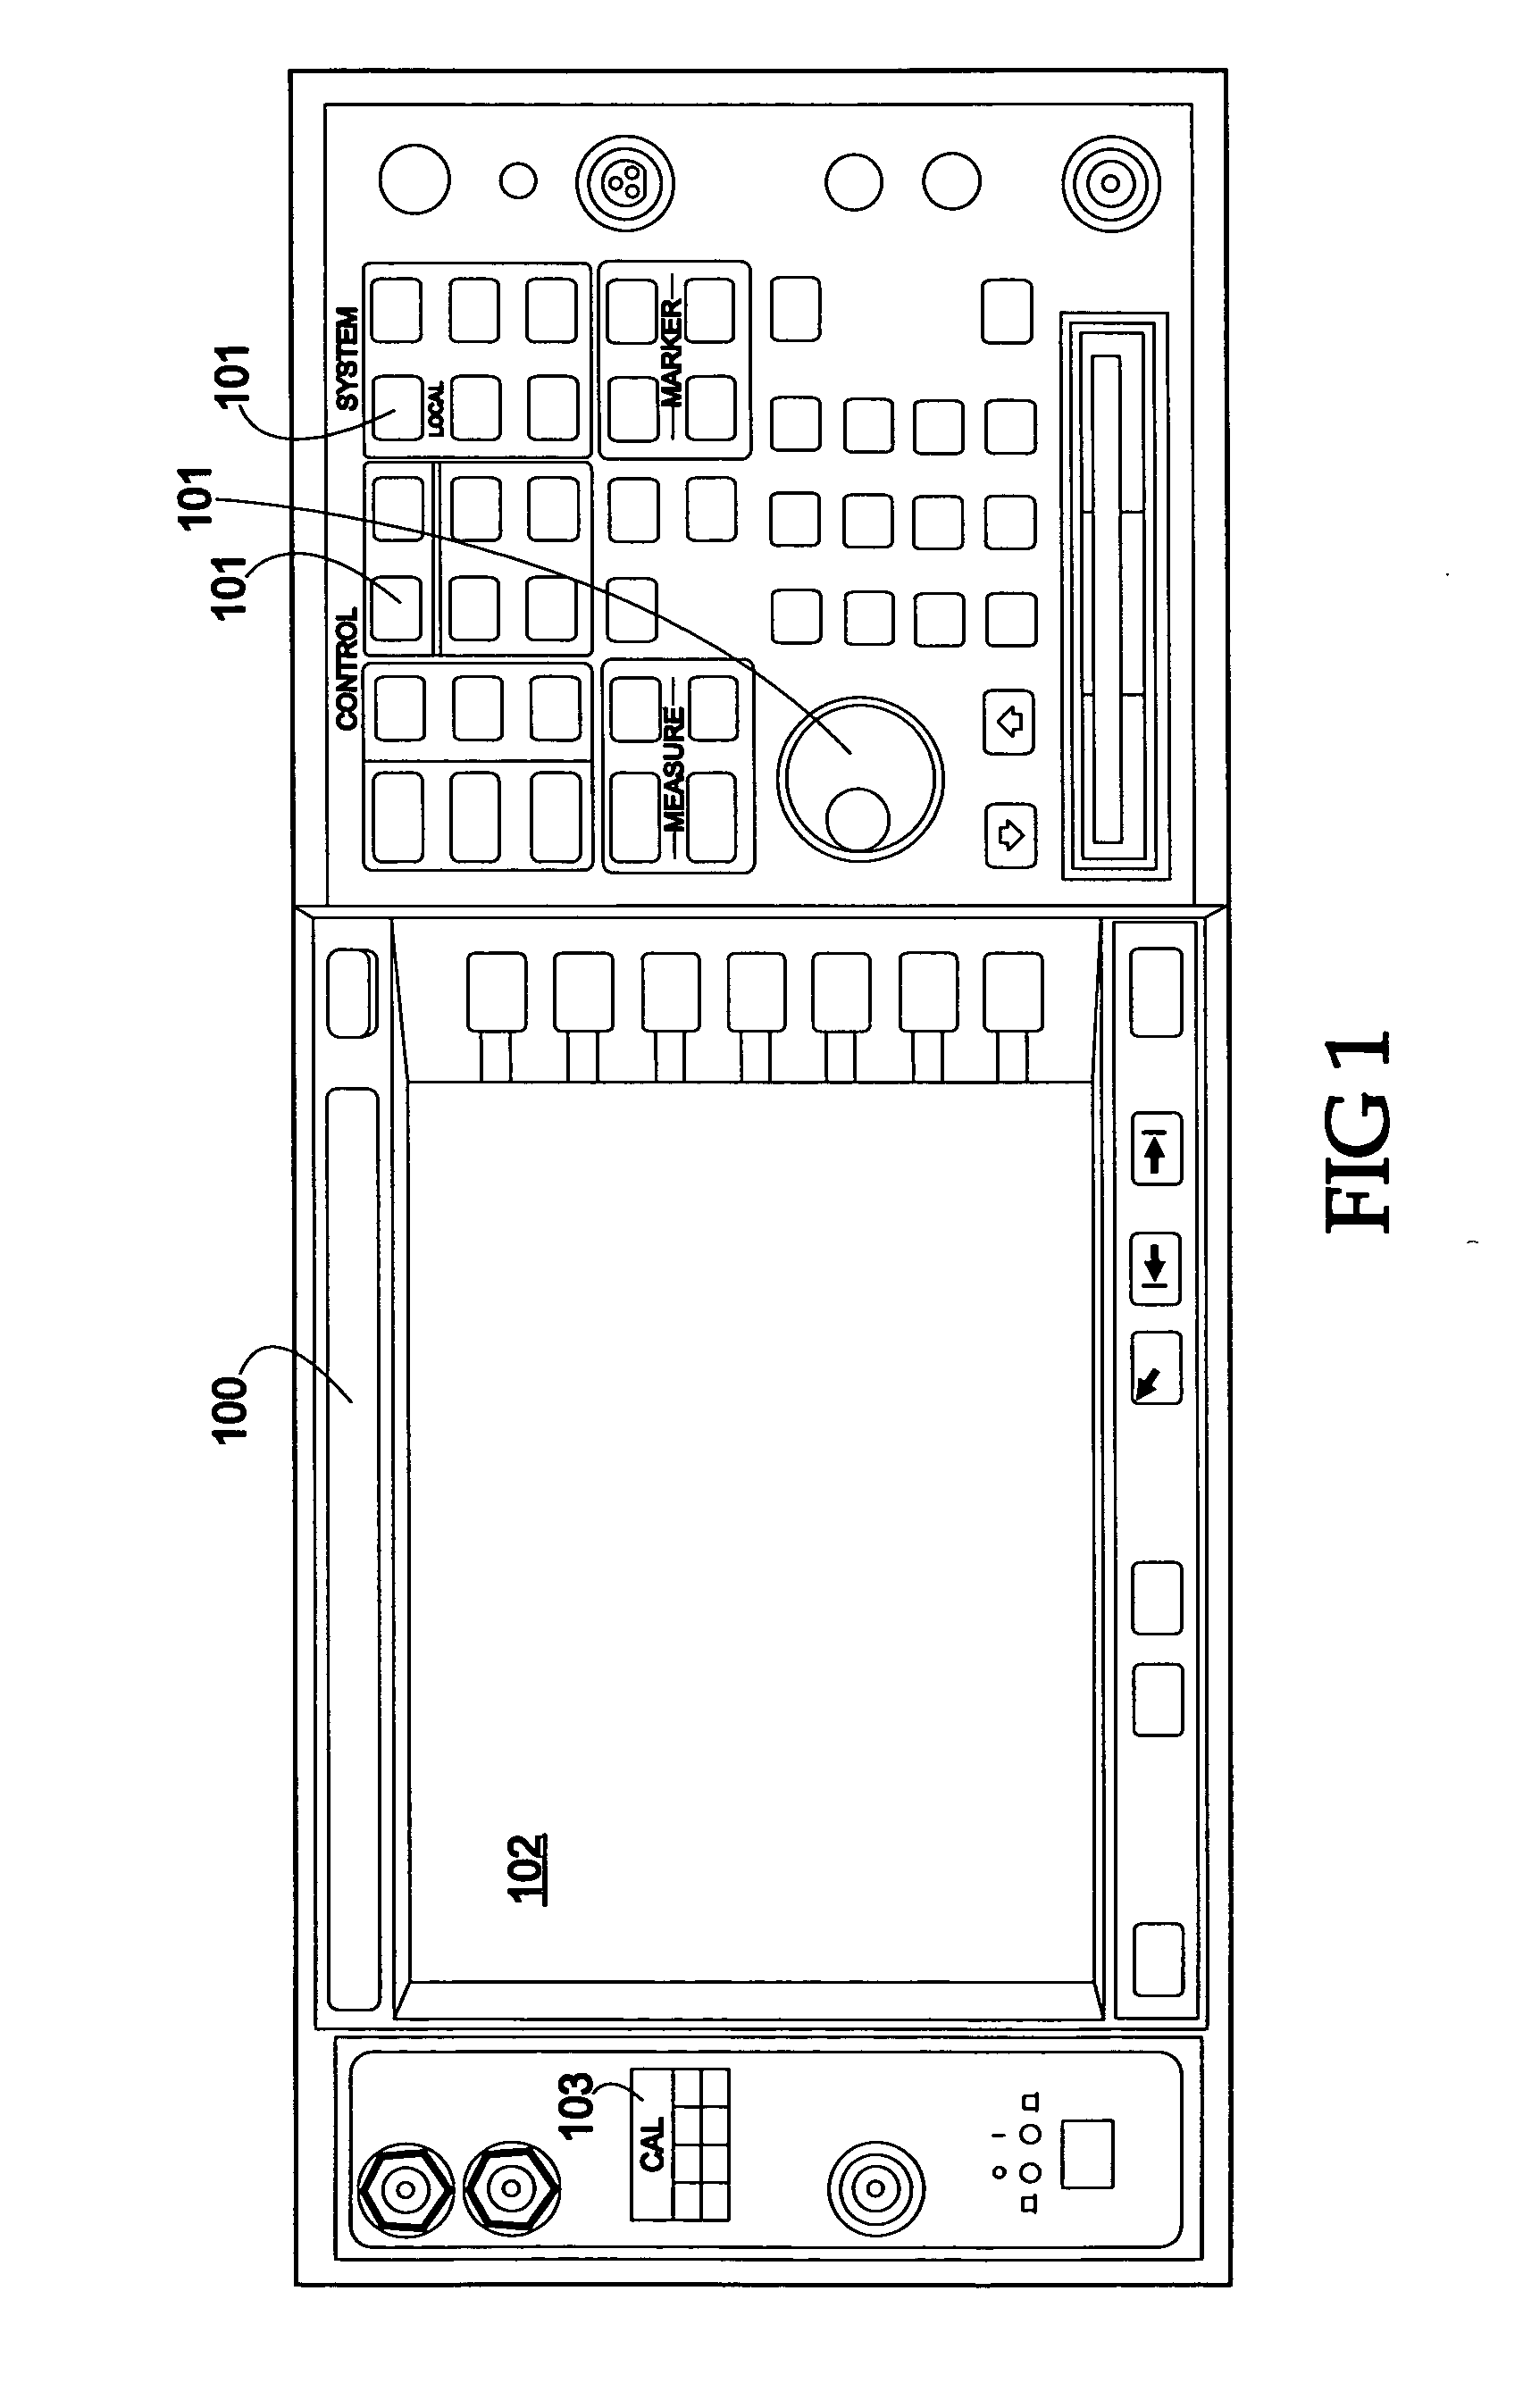 Method and apparatus for management of calibration data